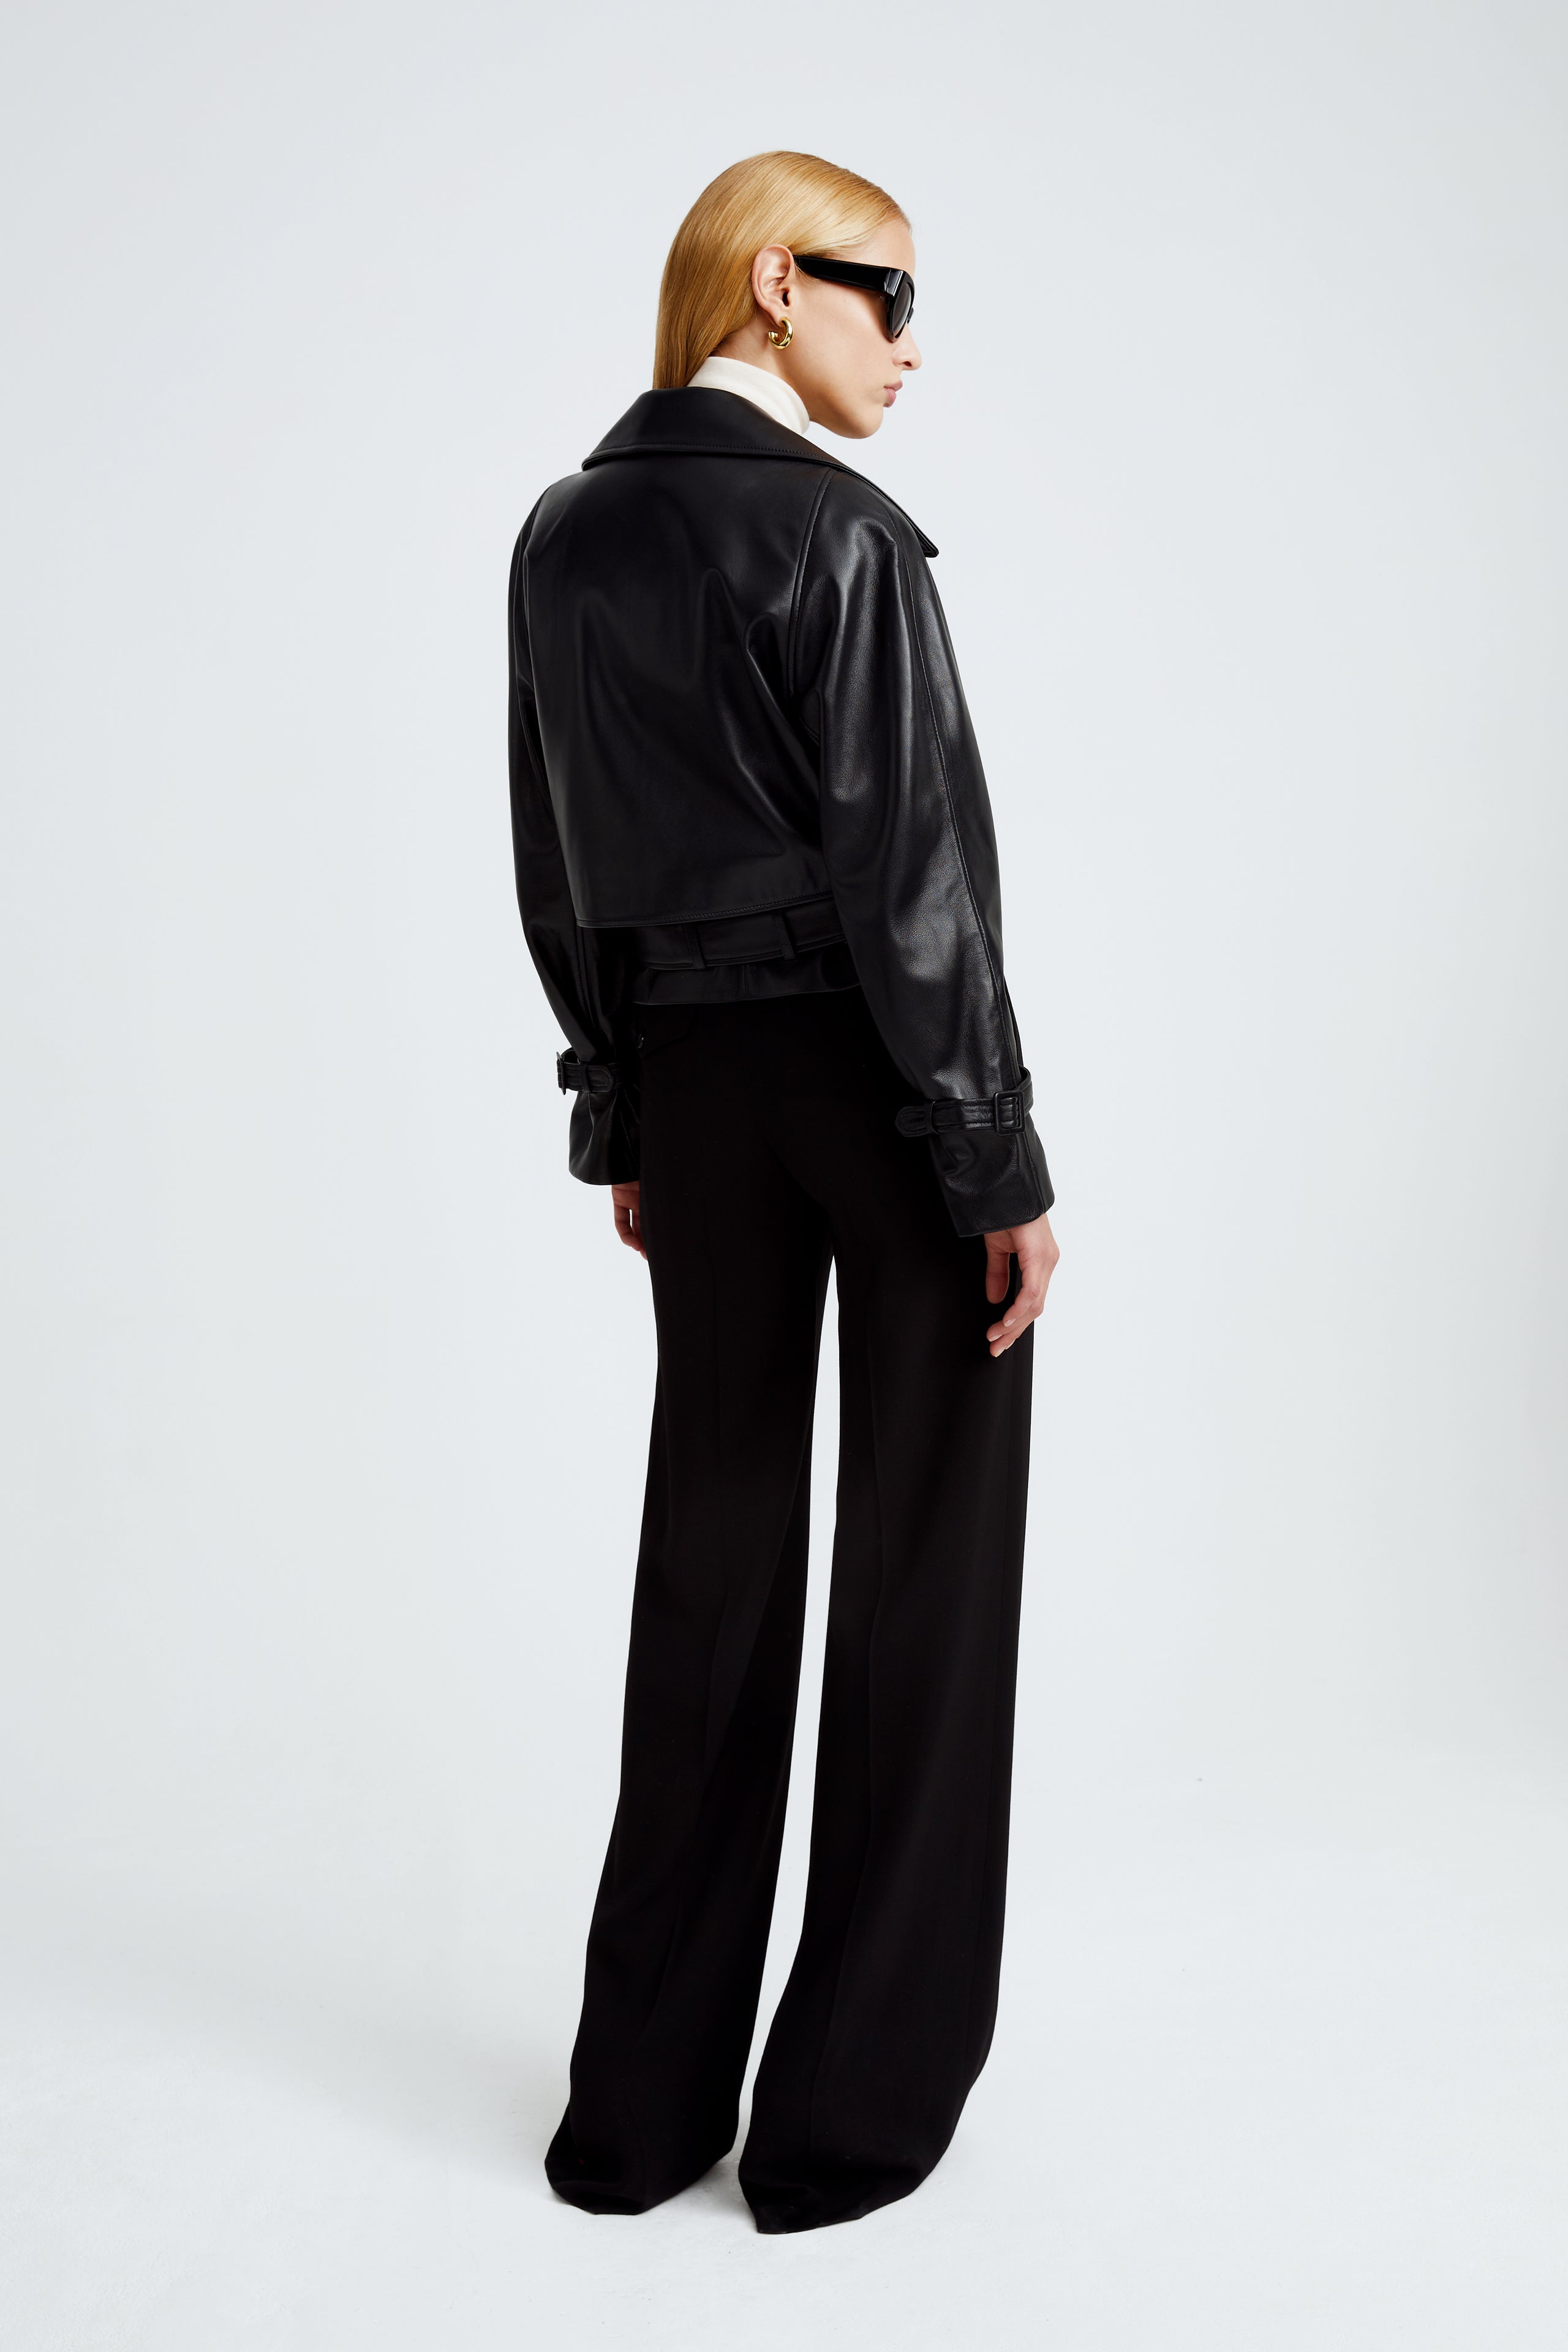 Model is wearing the Hatti Black Cropped Leather Jacket Back